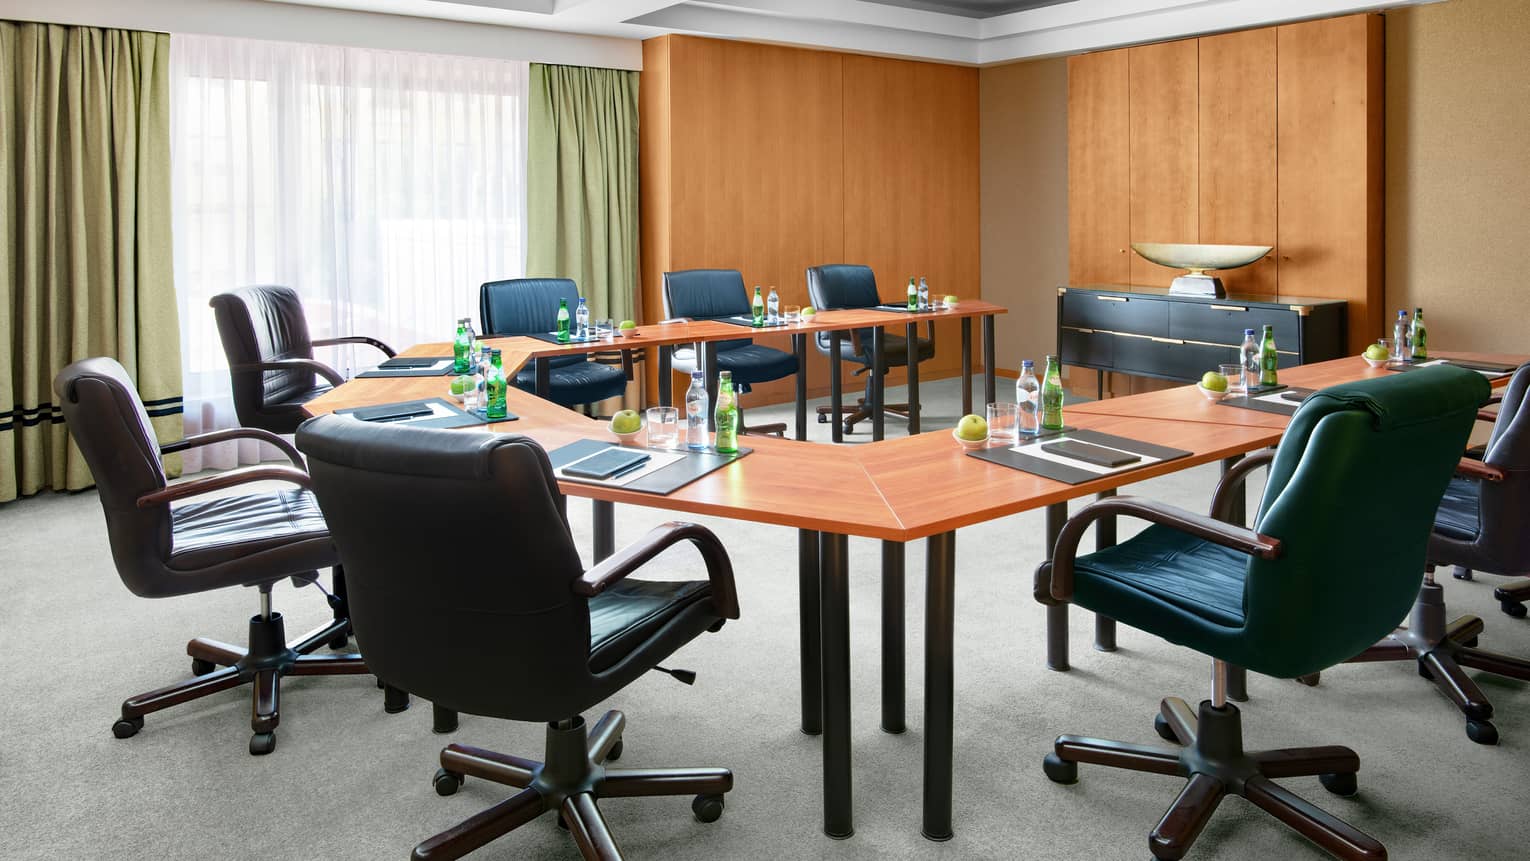 Pedro Alvares Cabral Meeting Room with classroom-style seating and black desk chairs